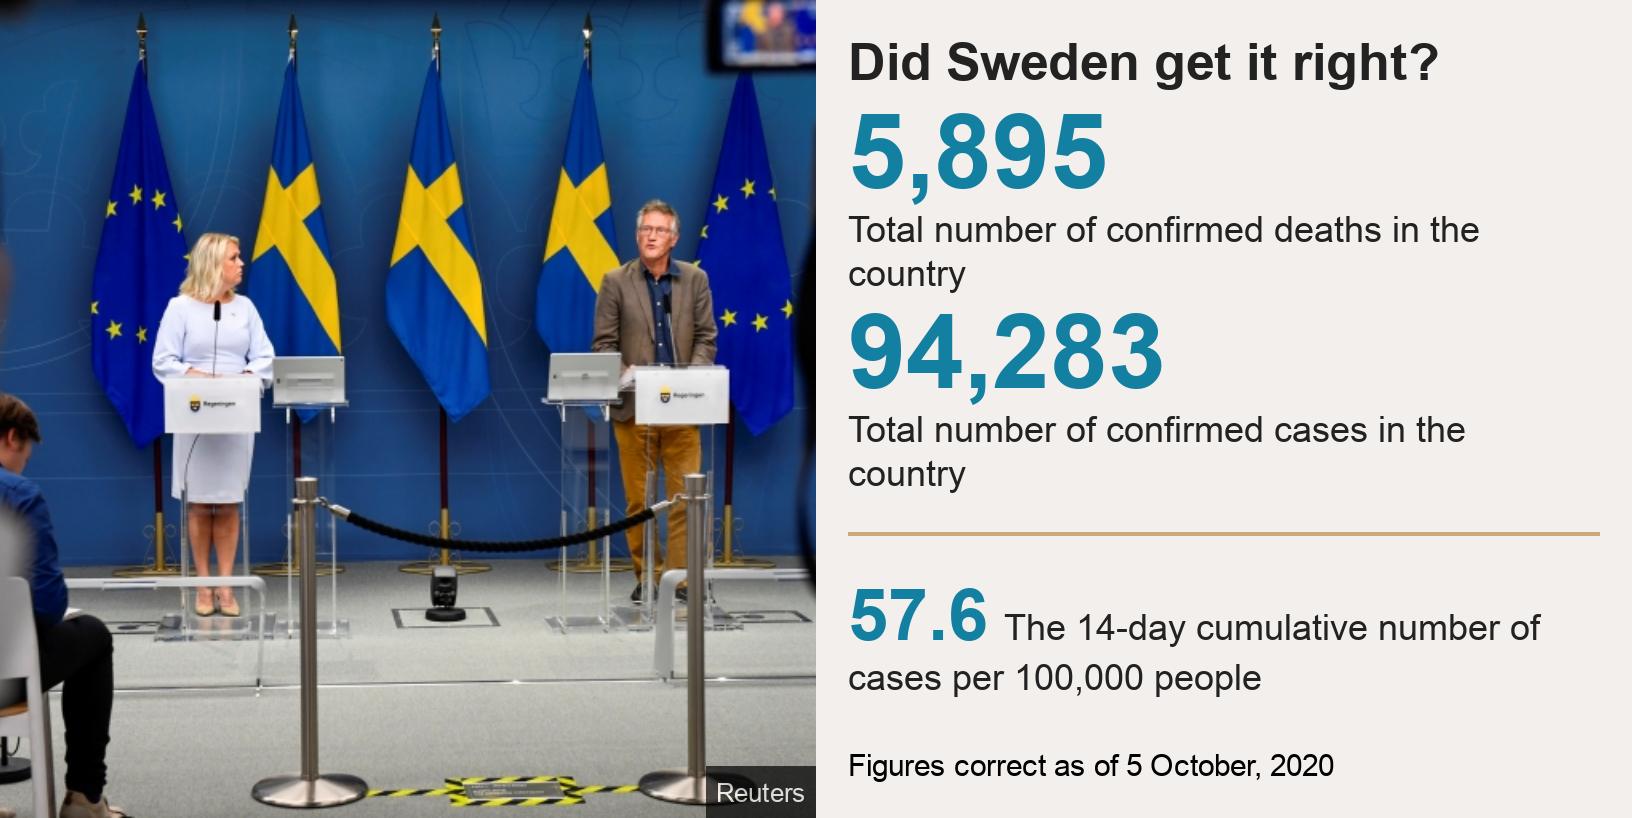 Did Sweden get it right?.  [ 5,895 Total number of confirmed deaths in the country ],[ 94,283 Total number of confirmed cases in the country ] [ 57.6 The 14-day cumulative number of cases per 100,000 people ], Source: Figures correct as of 5 October, 2020, Image: Officials in Sweden